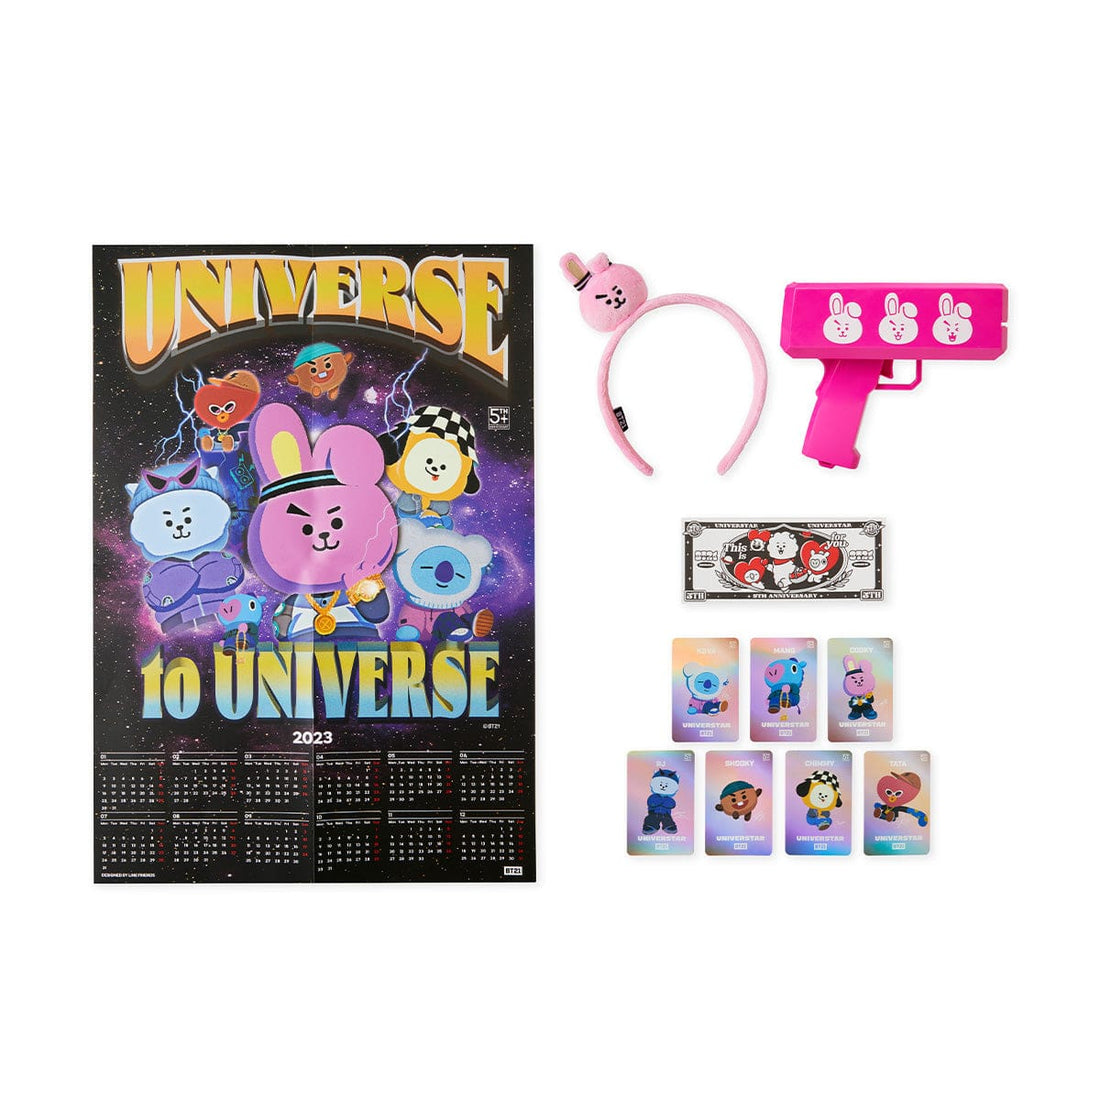 LINE FRIENDS TOYS COOKY BT21 COOKY 5 Years Anniversary SEASON?™S GREETINGS PACKAGE